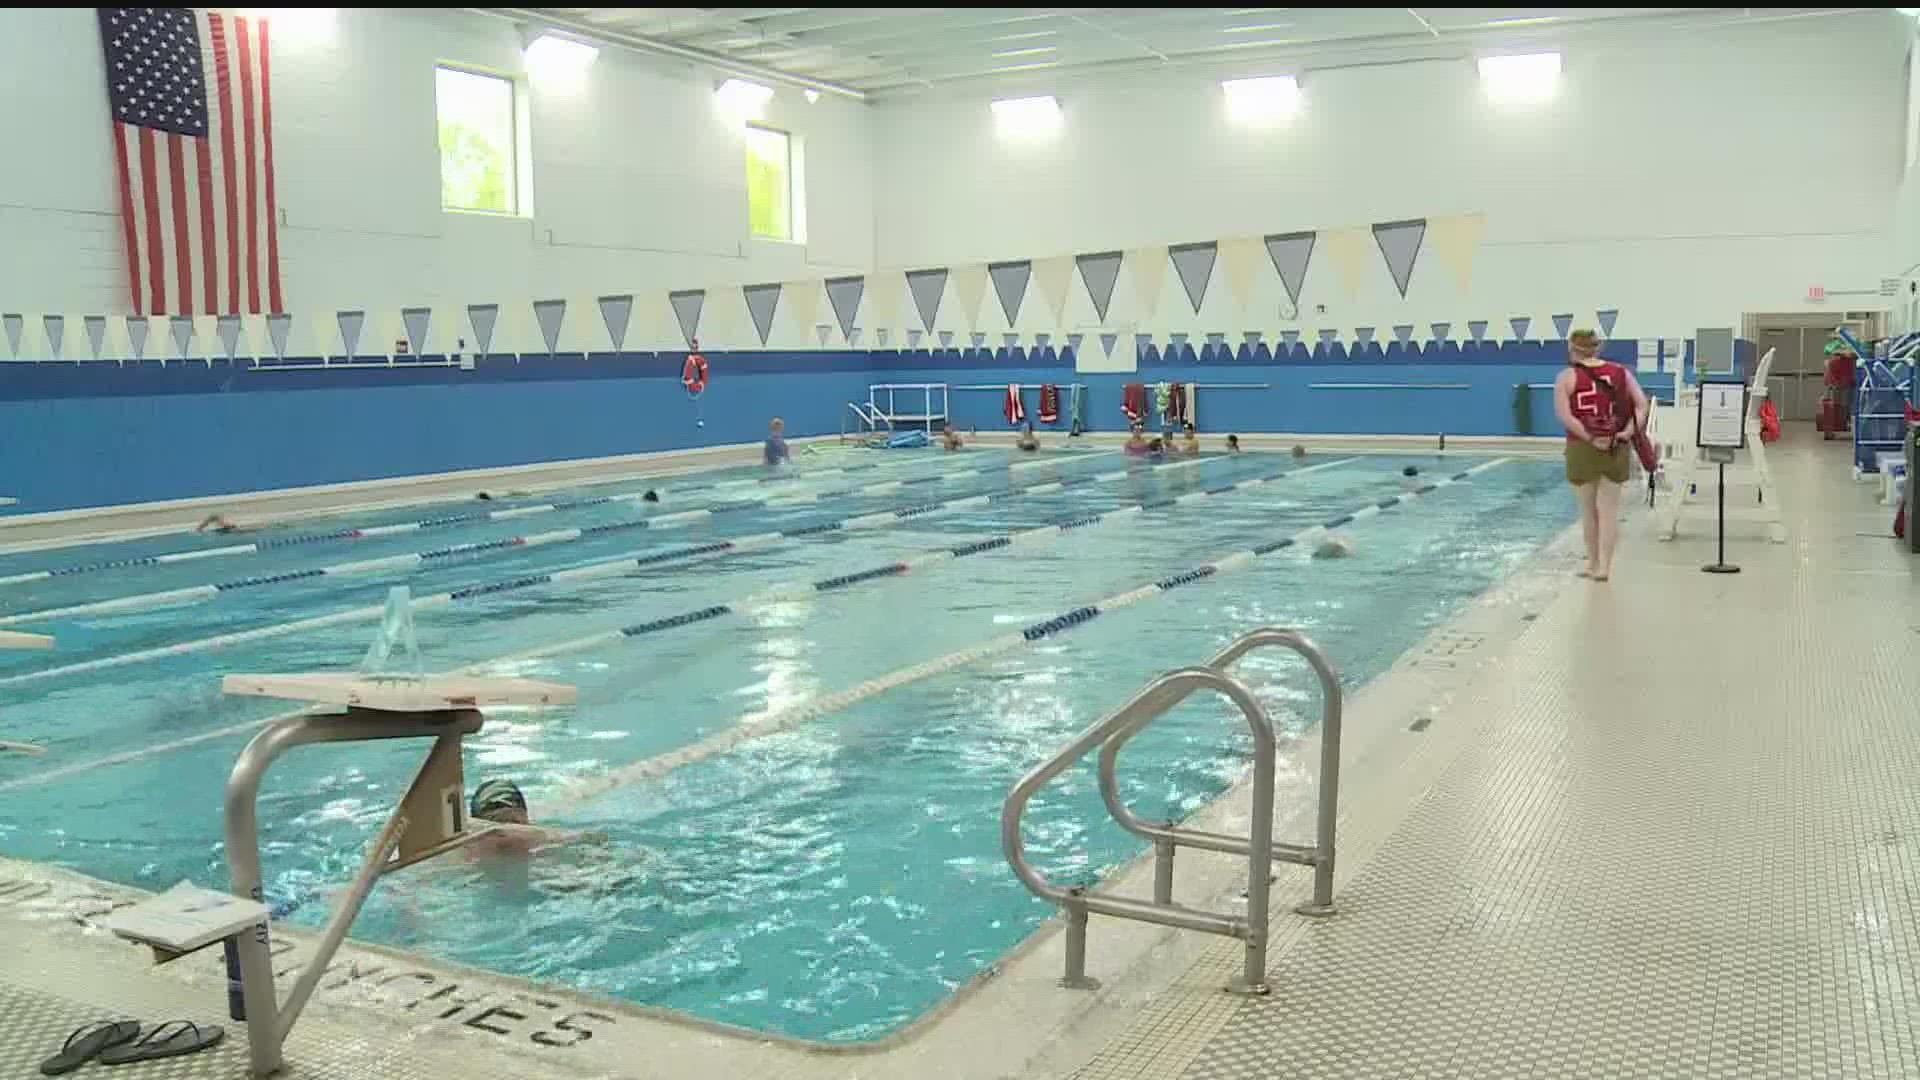 The bill would bolster safety standards and promote awareness to prevent pool-related injuries and deaths.